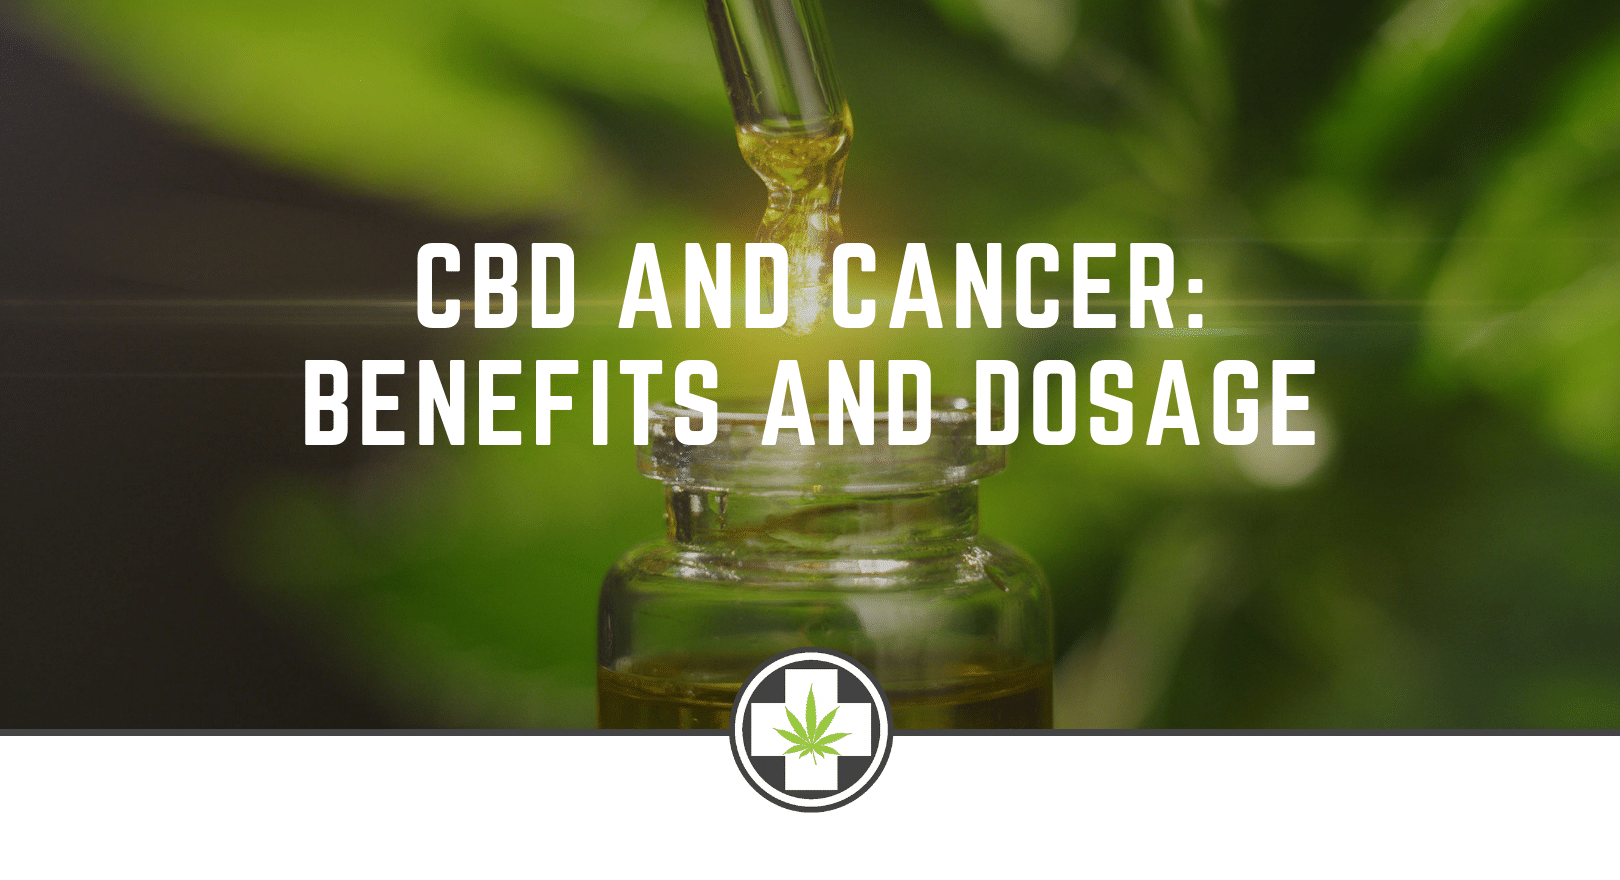 CBD and Cancer: Benefits and Dosage